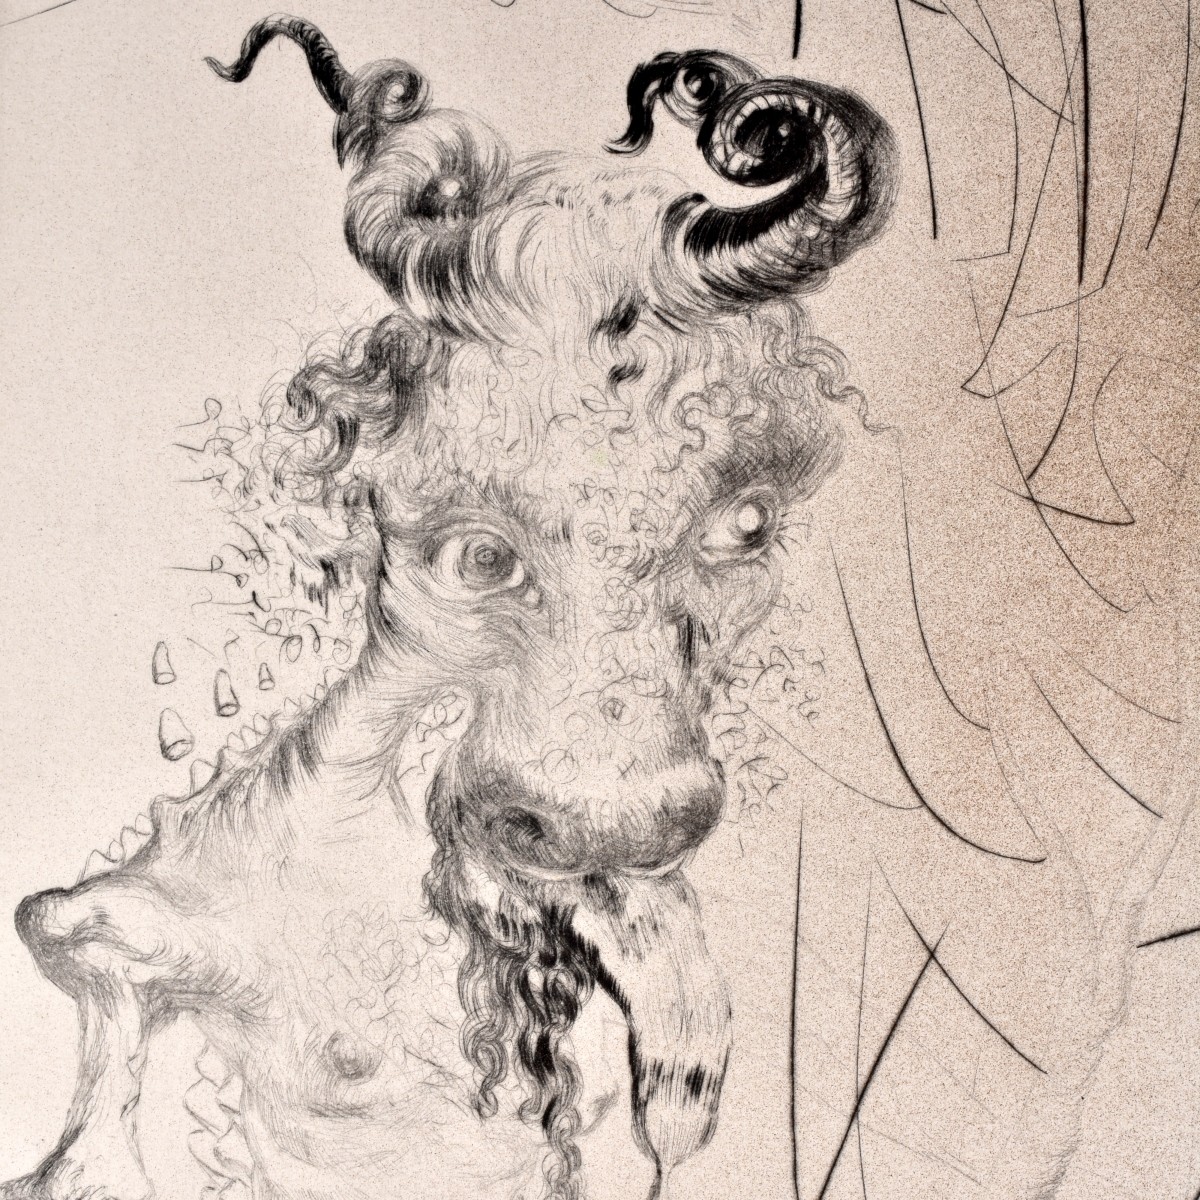 Salvador Dali (1904-1989) Drypoint Etching